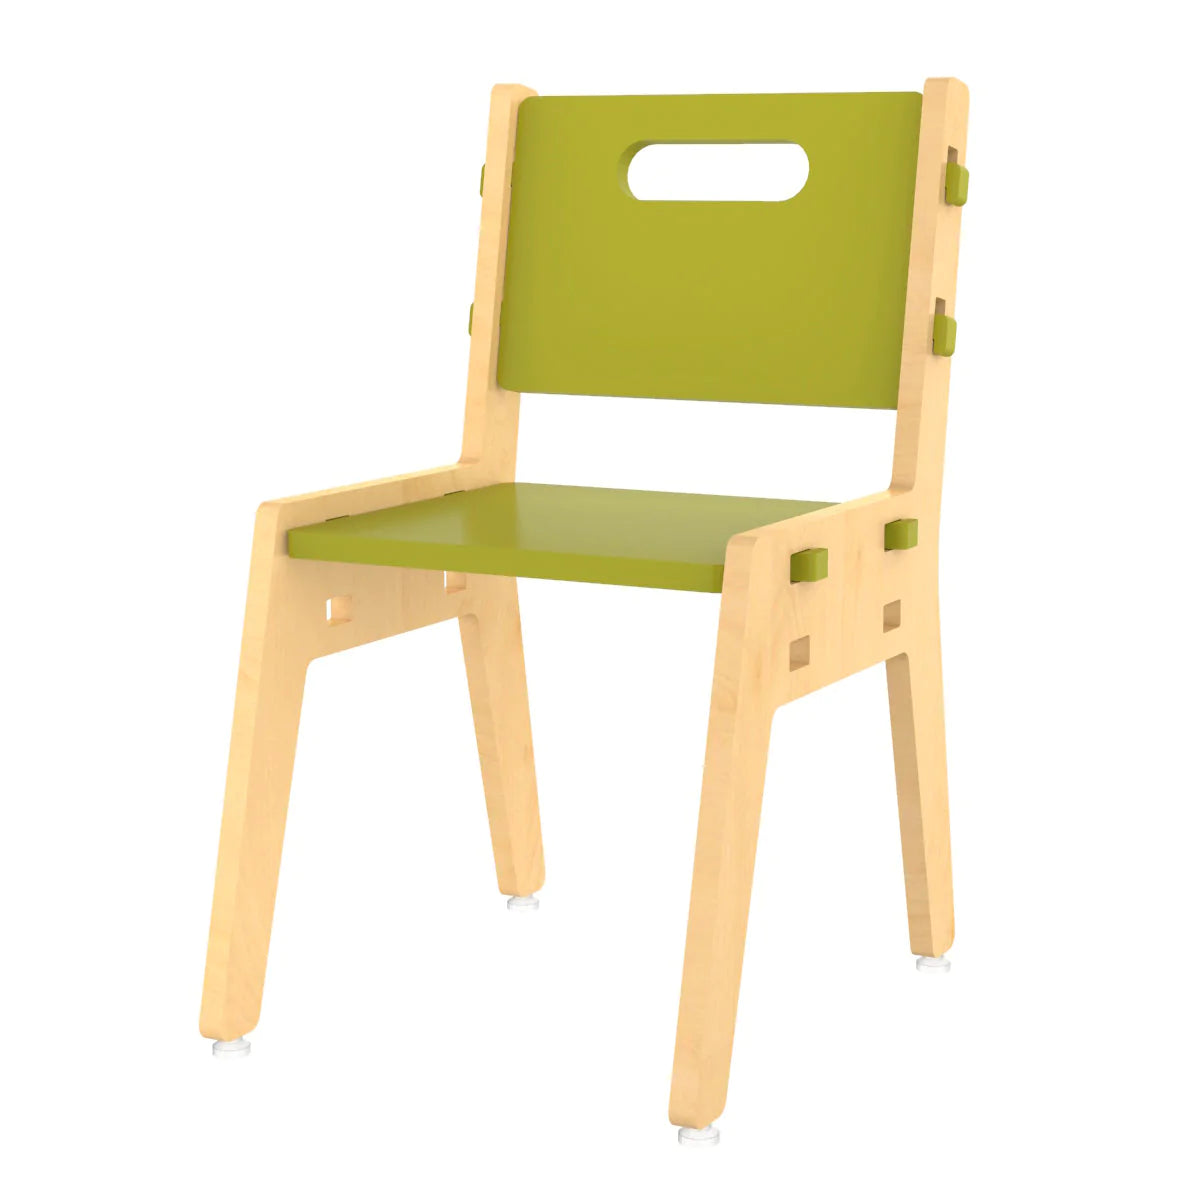 Buy Silver Peach Wooden Chair - Green - SkilloToys.com